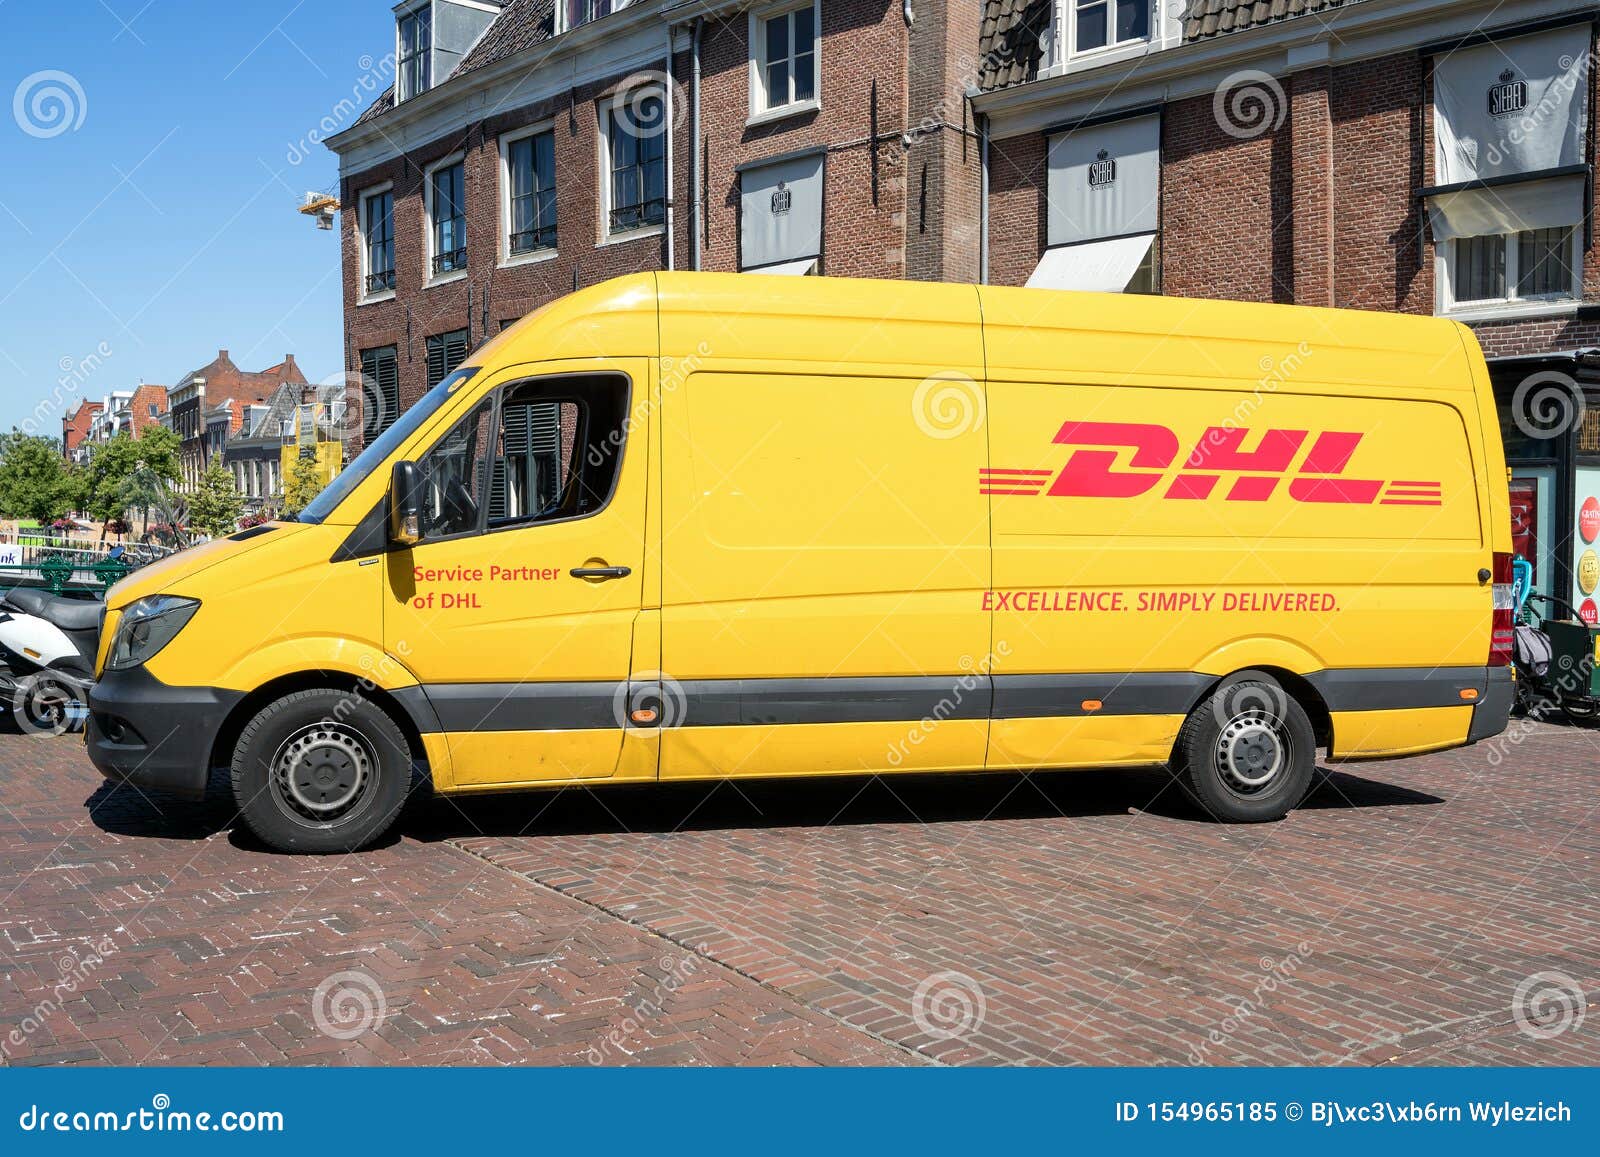 DHL delivery van editorial image. Image of delivery - 154965185